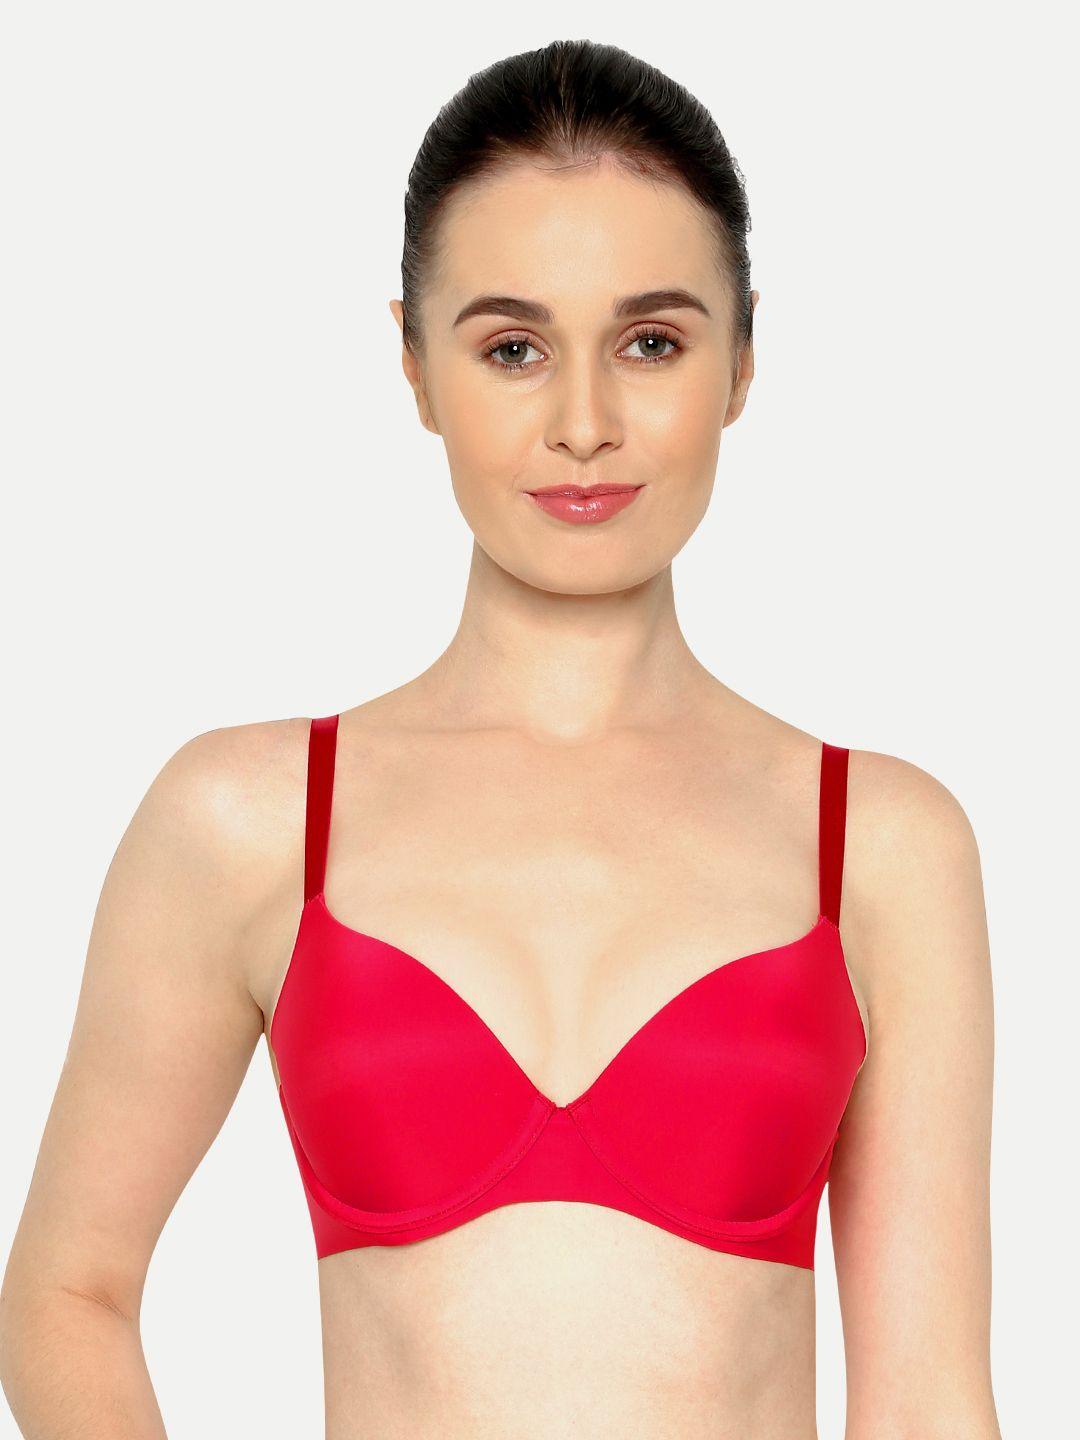 triumph-maximizer-154-wired-comfortable-half-cup-body-make-up-push-up-bra